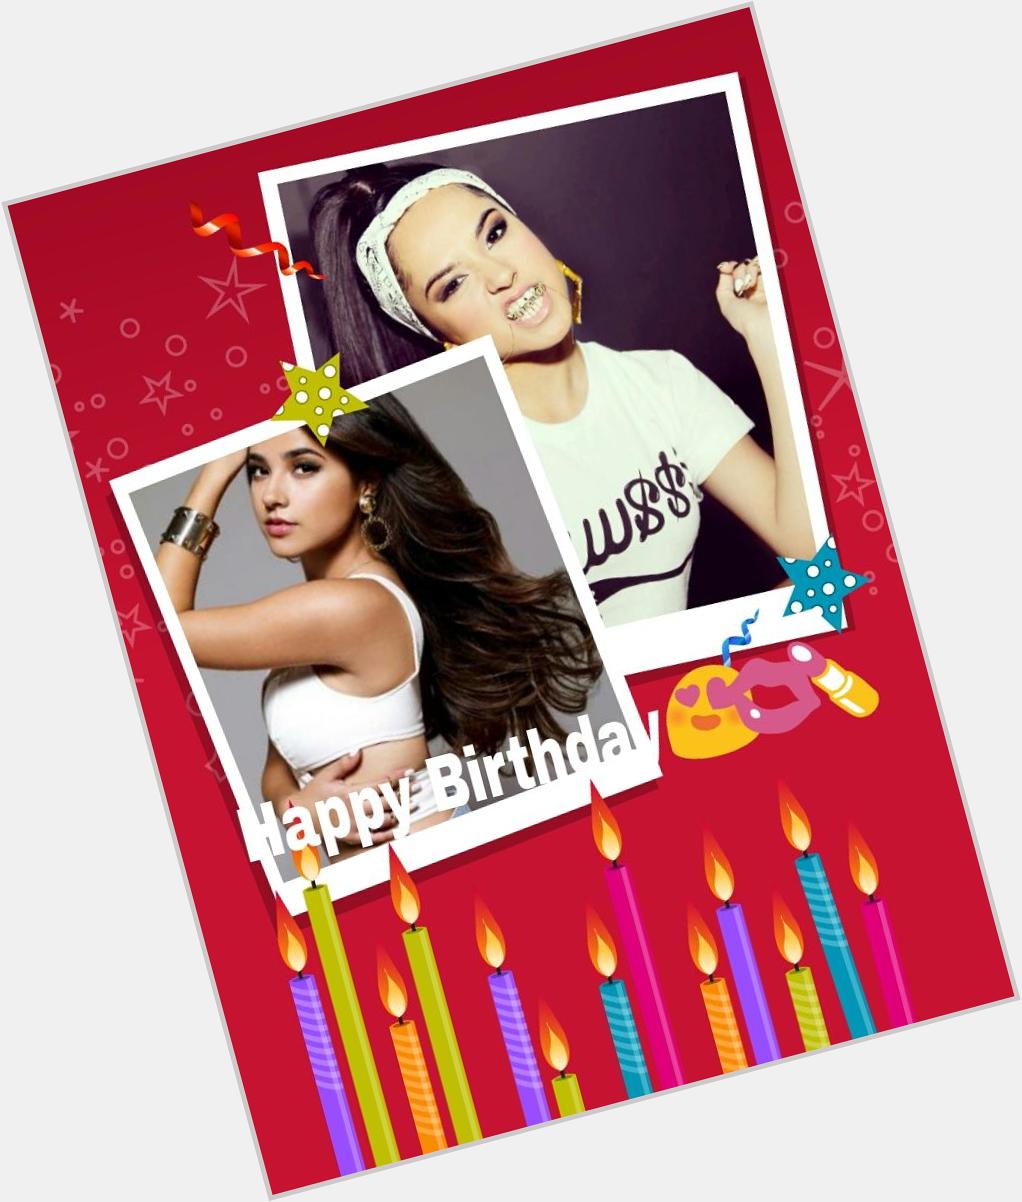 Happy birthday to Becky g long life and properties. More wish and dream. I love Becky g 